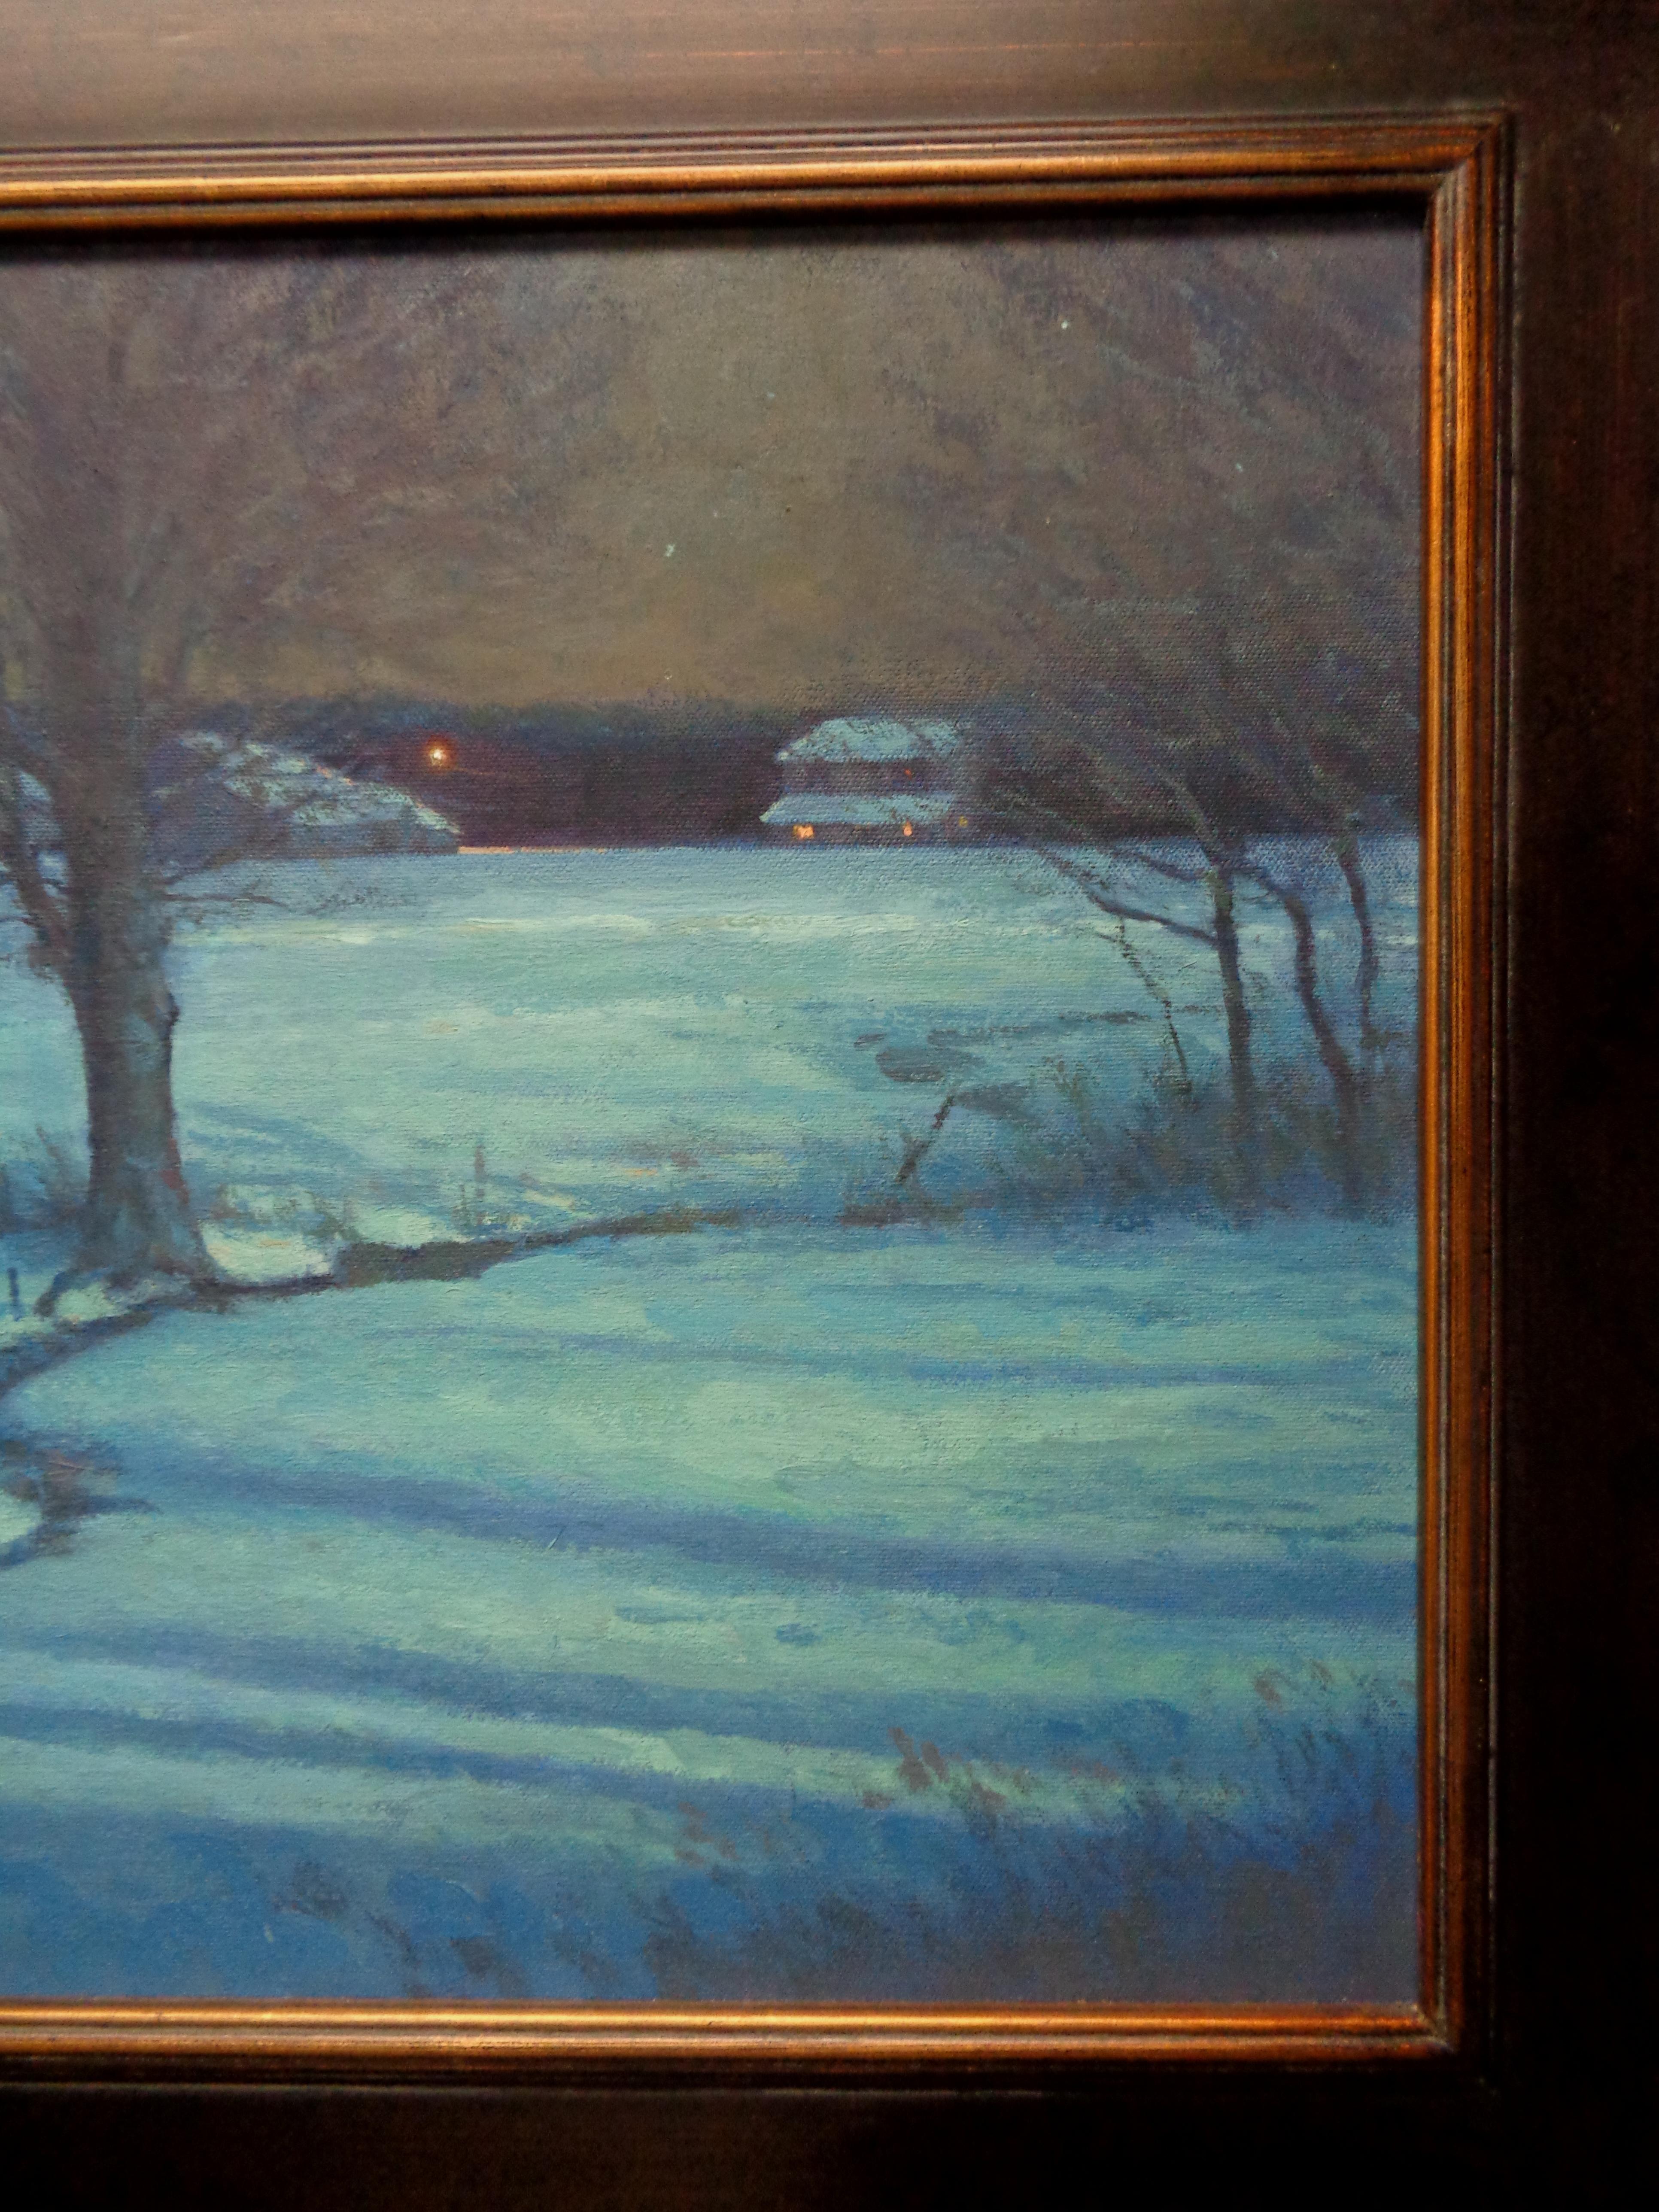  Winter Moonlight Nocturne Snow Scene Landscape Oil Painting by Michael Budden For Sale 3